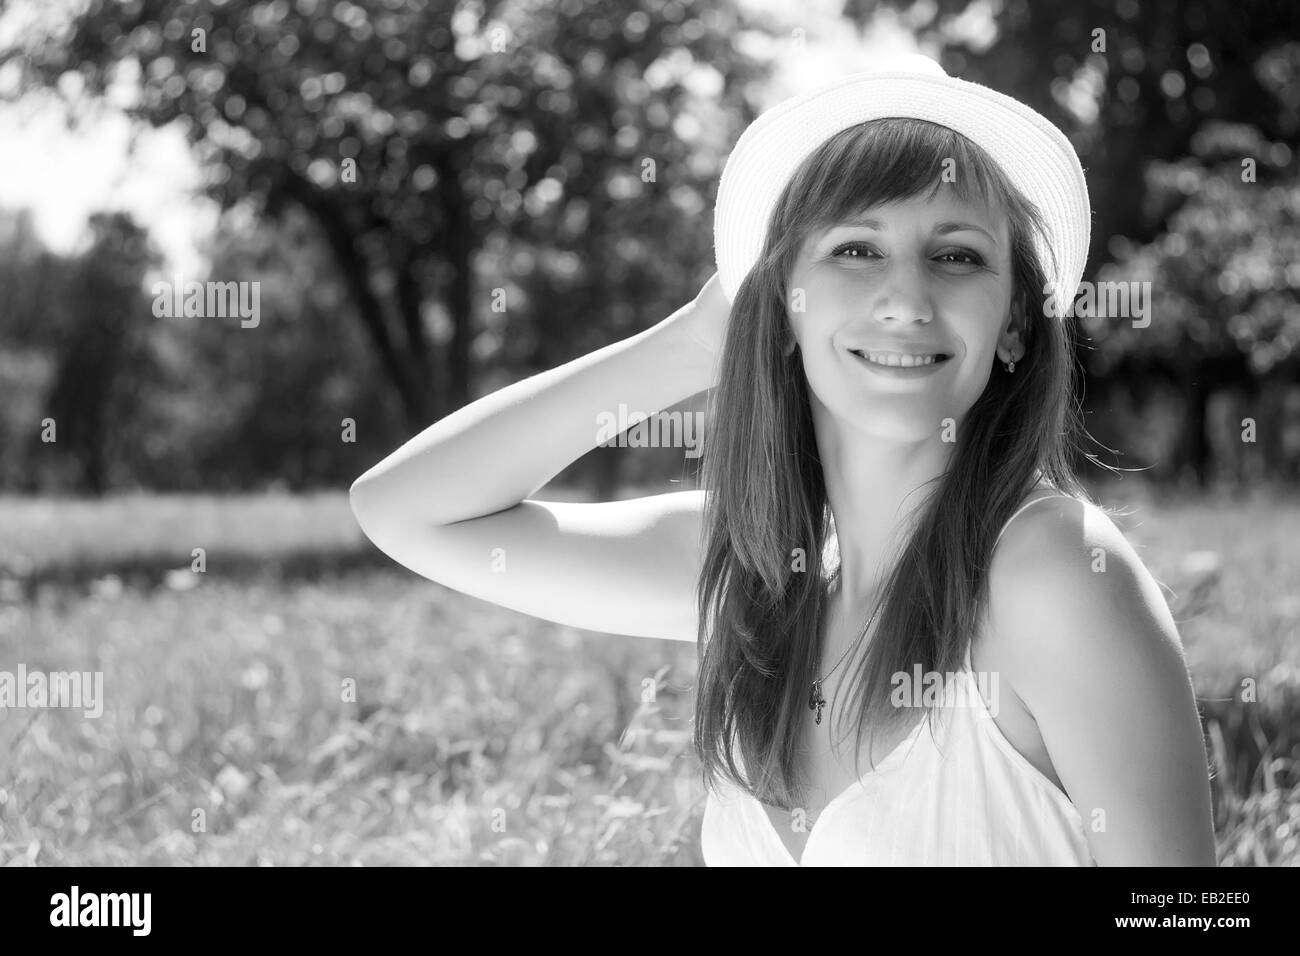 Young cheerful adult girl in summer park. Smiling woman with hat in outdoor environment. Black and white image Stock Photo